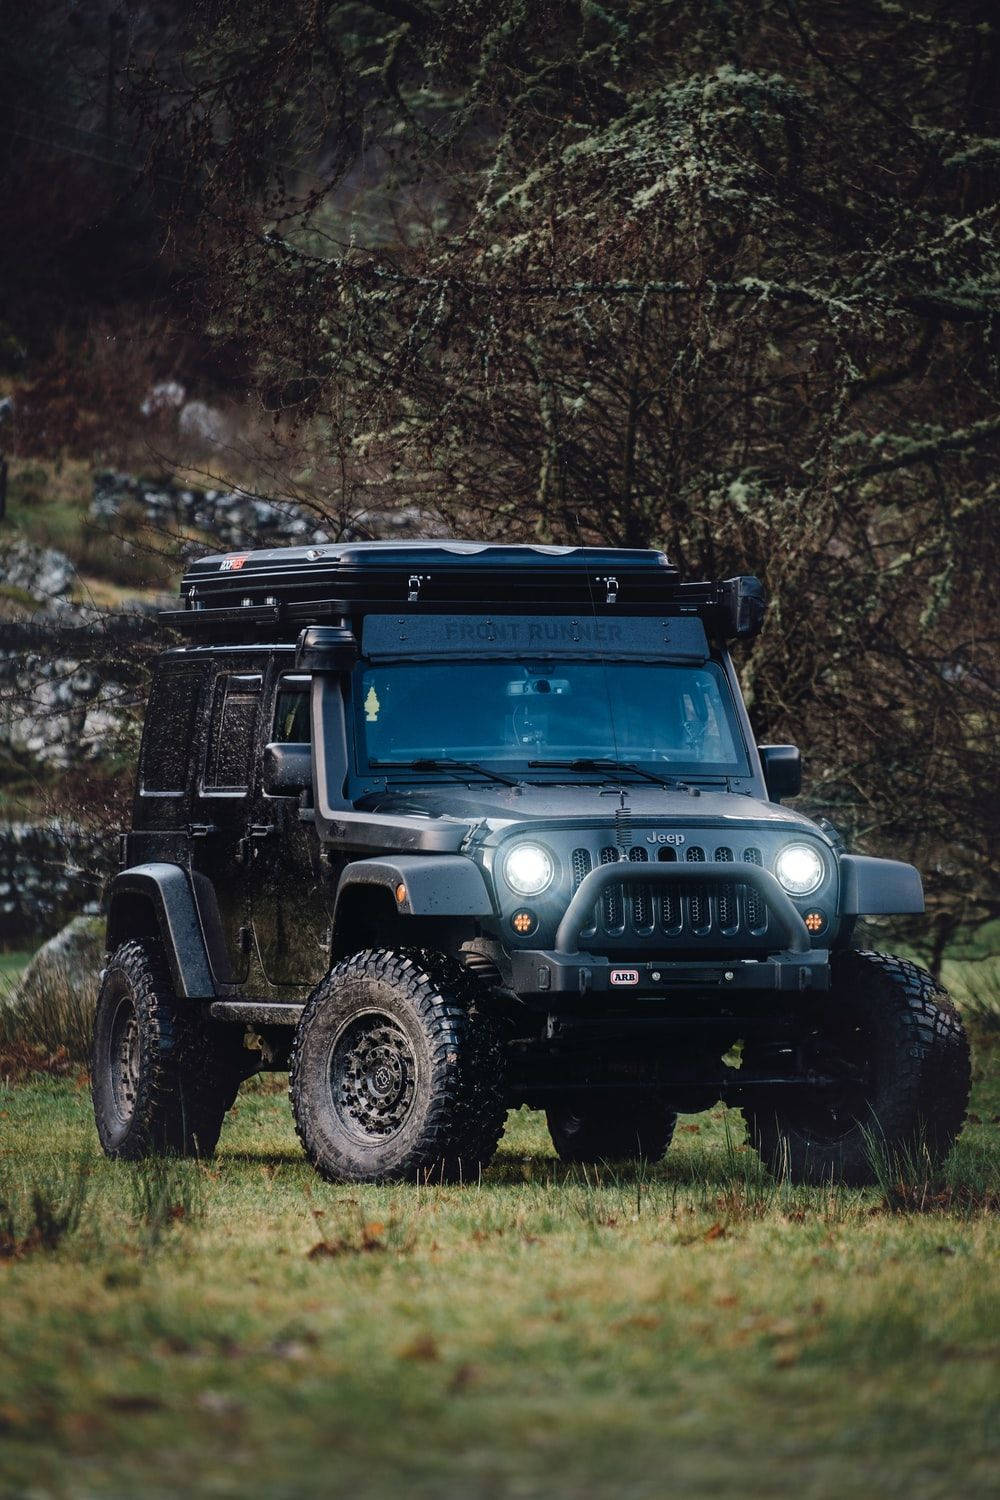 Dynamic Black Jeep Wrangler With Top Rack Over Rugged Terrain